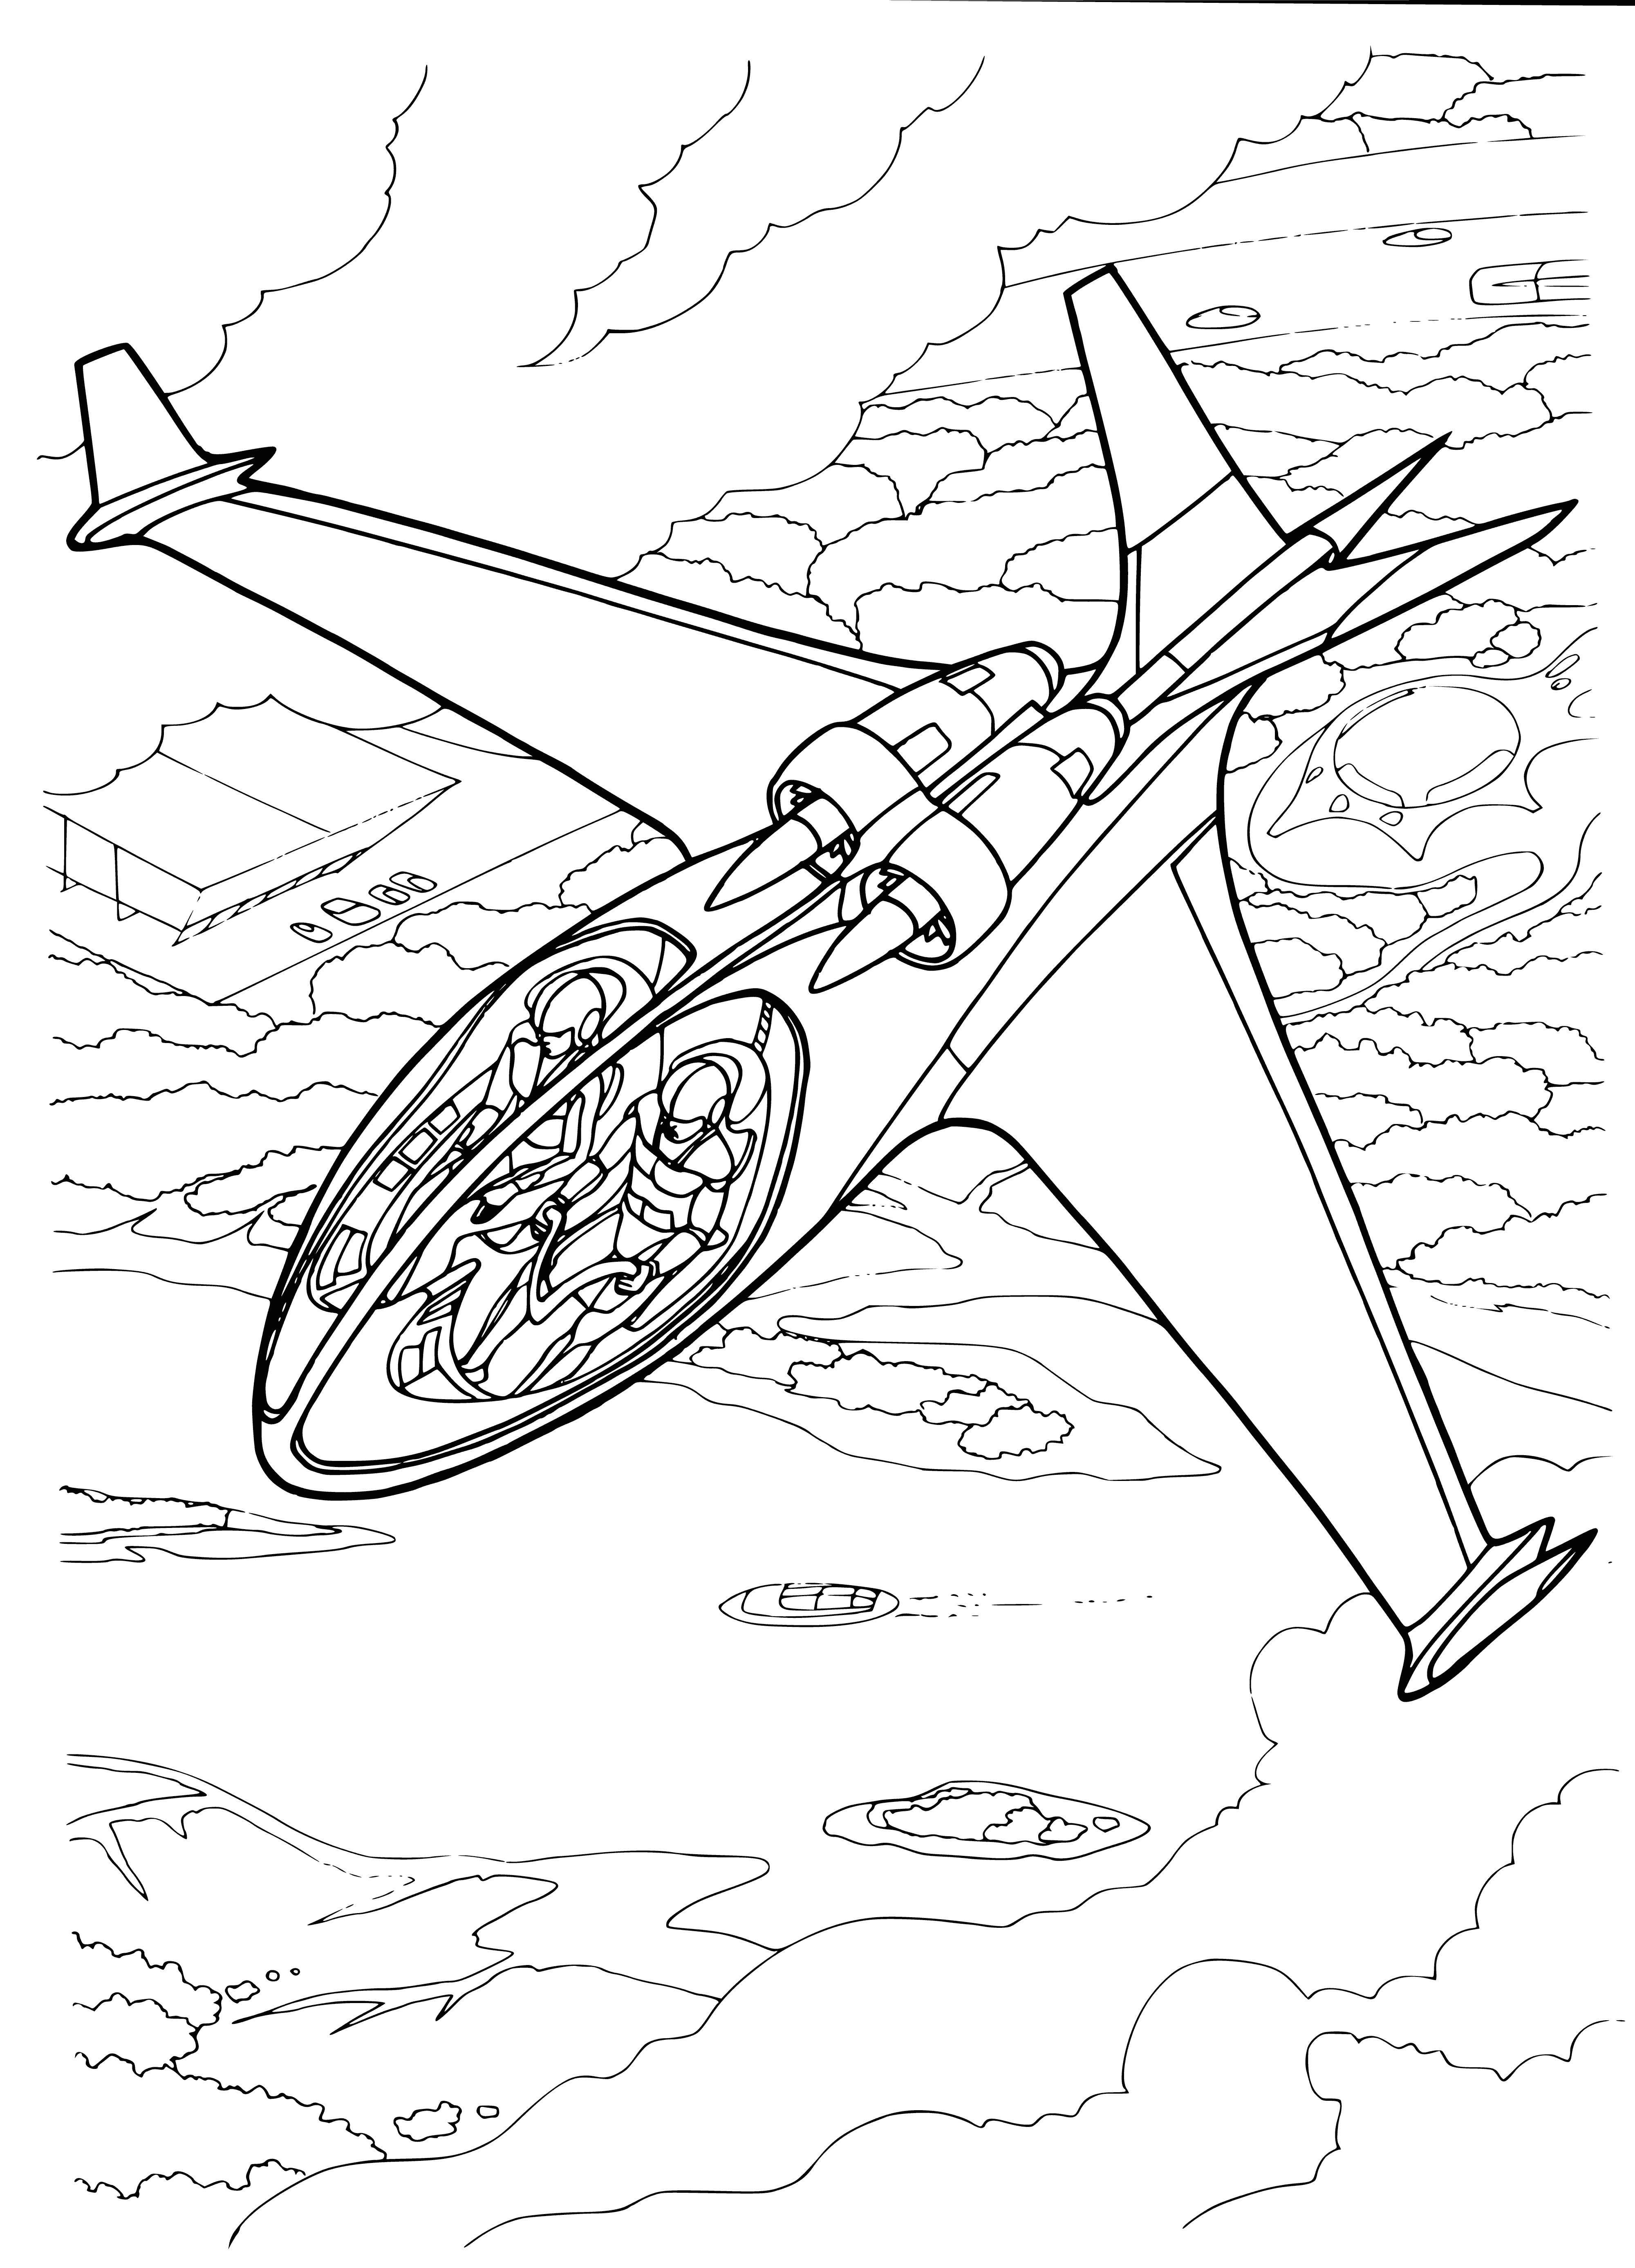 coloring page: Small, personal plane seats up to 2, powered by jet engine, w/sleek design, small cockpit, wings, & horizontal tail fin. #aviation